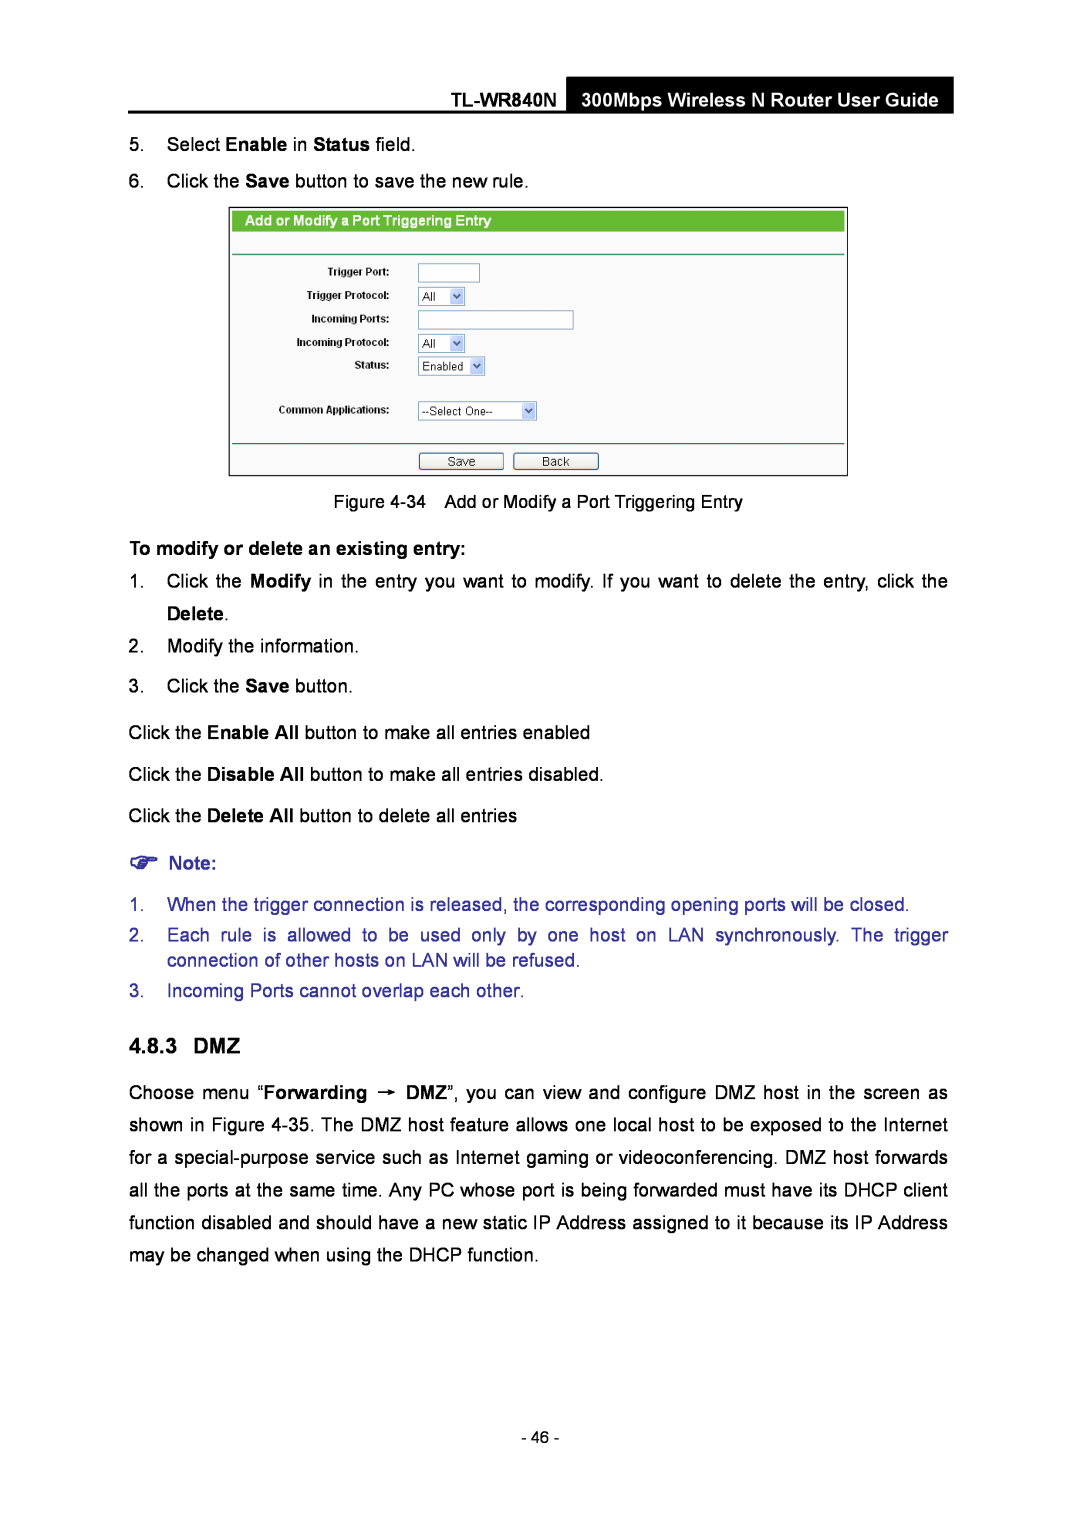 TP-Link manual 4.8.3 DMZ, Incoming Ports cannot overlap each other, TL-WR840N 300Mbps Wireless N Router User Guide 